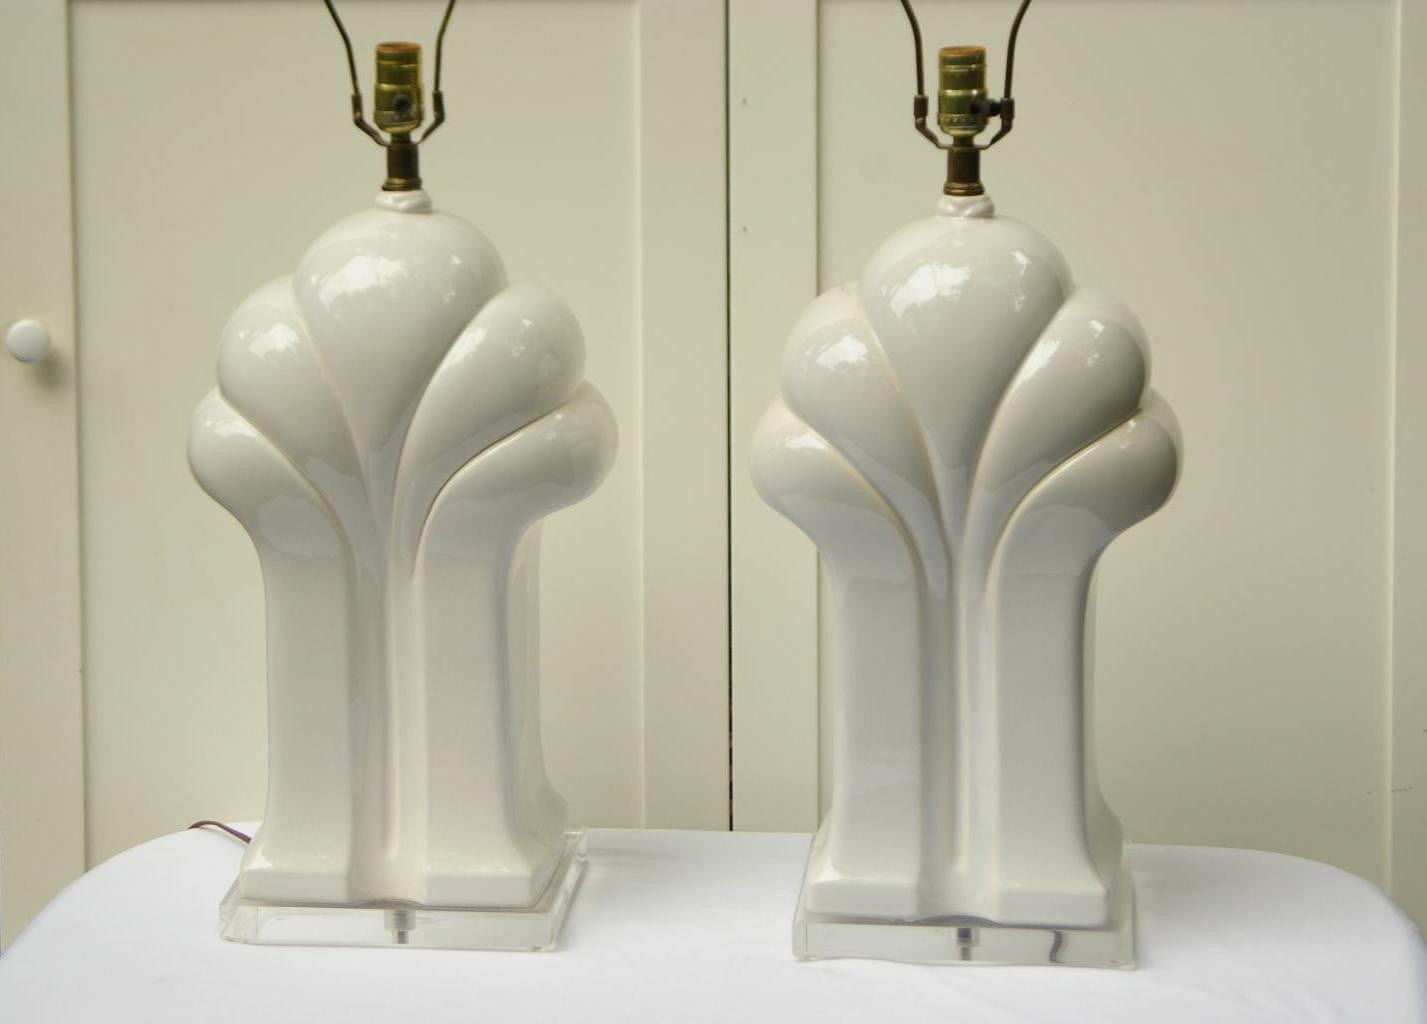 I Like Mike's Mid-Century Modern lighting Pair Big White Hollywood Regency Deco Ceramic Lamps with Lucite Bases